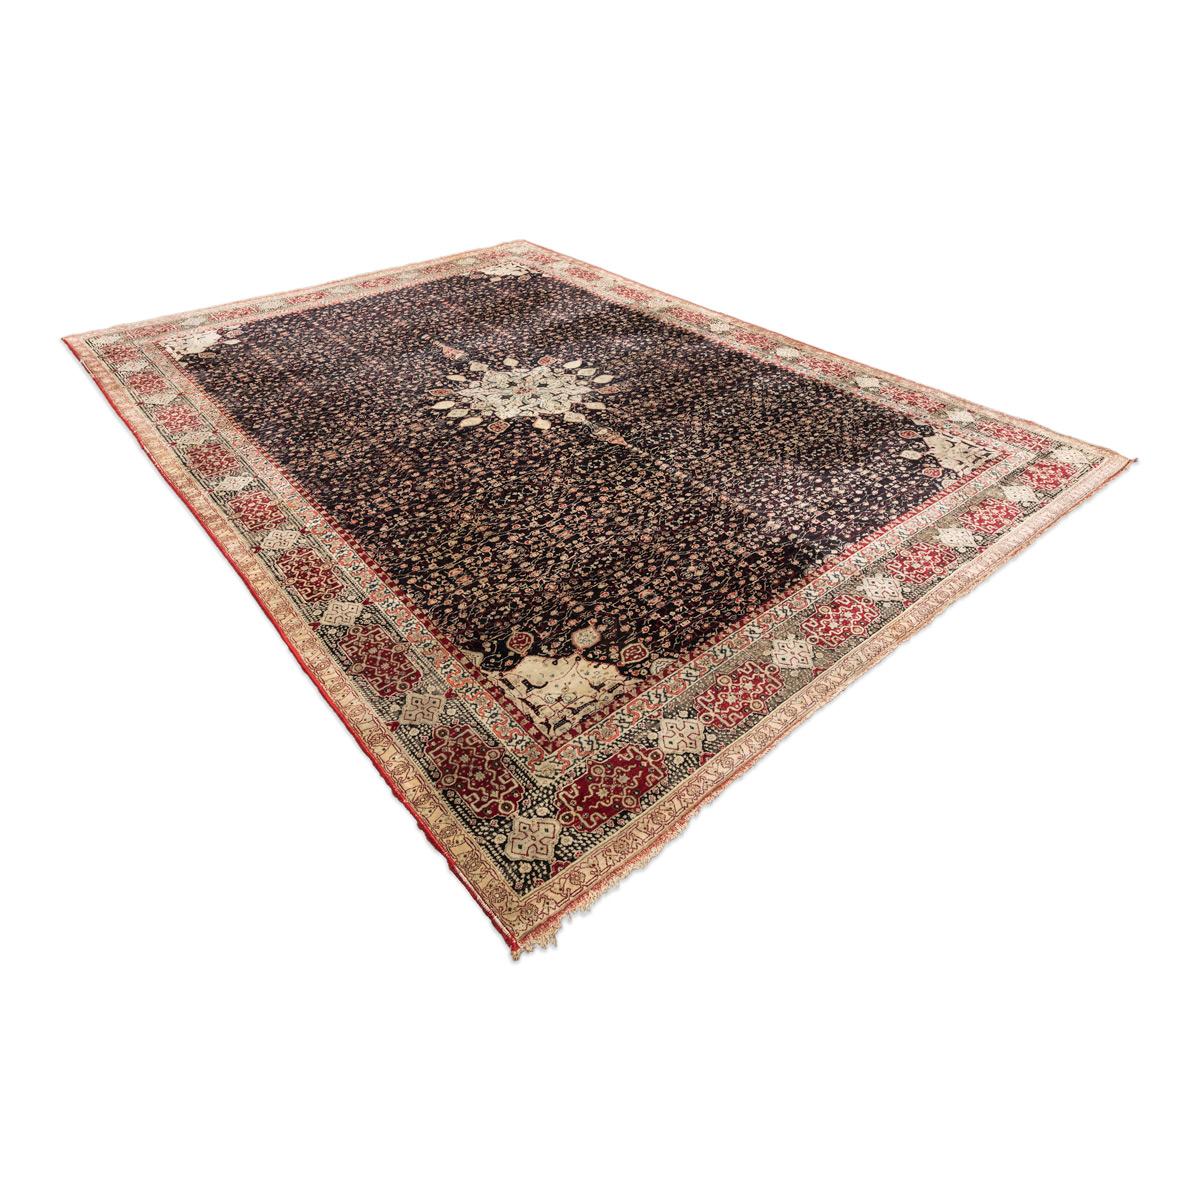 Hand-Knotted Antique Agra India Wool Rug. Circa. 1930. 3.50 x 2.70 m. For Sale